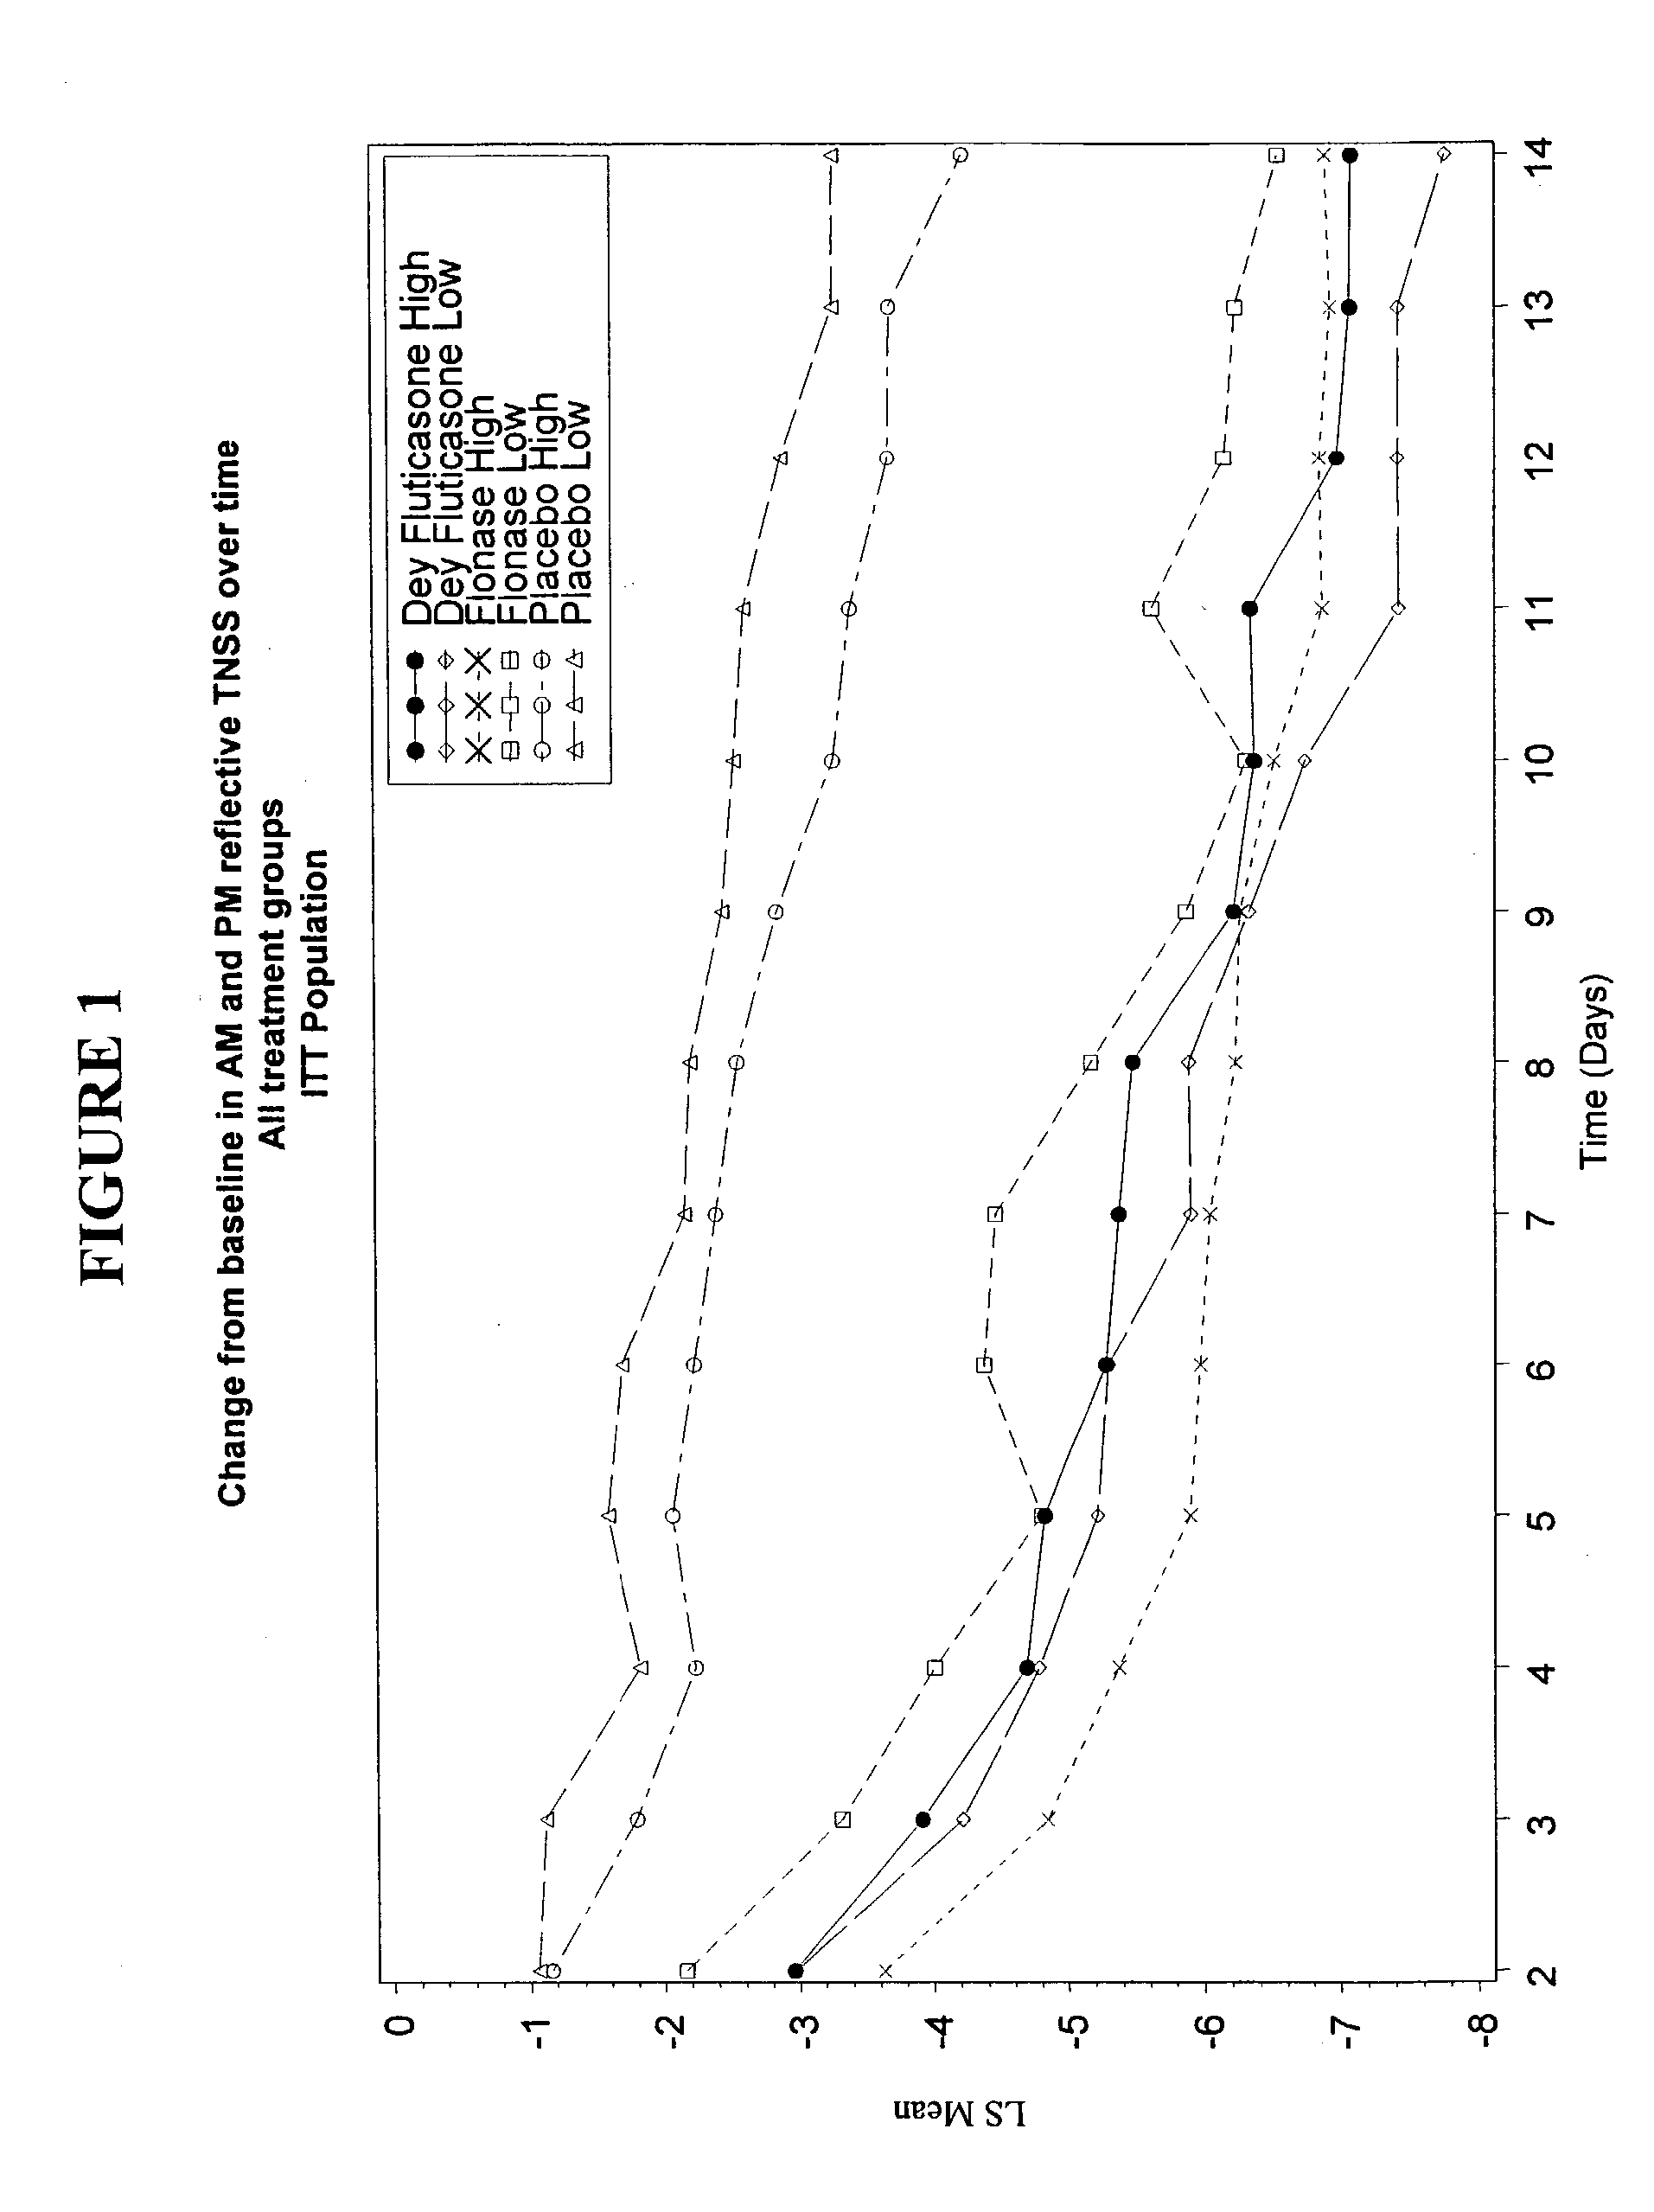 Nasal pharmaceutical formulations and methods of using the same